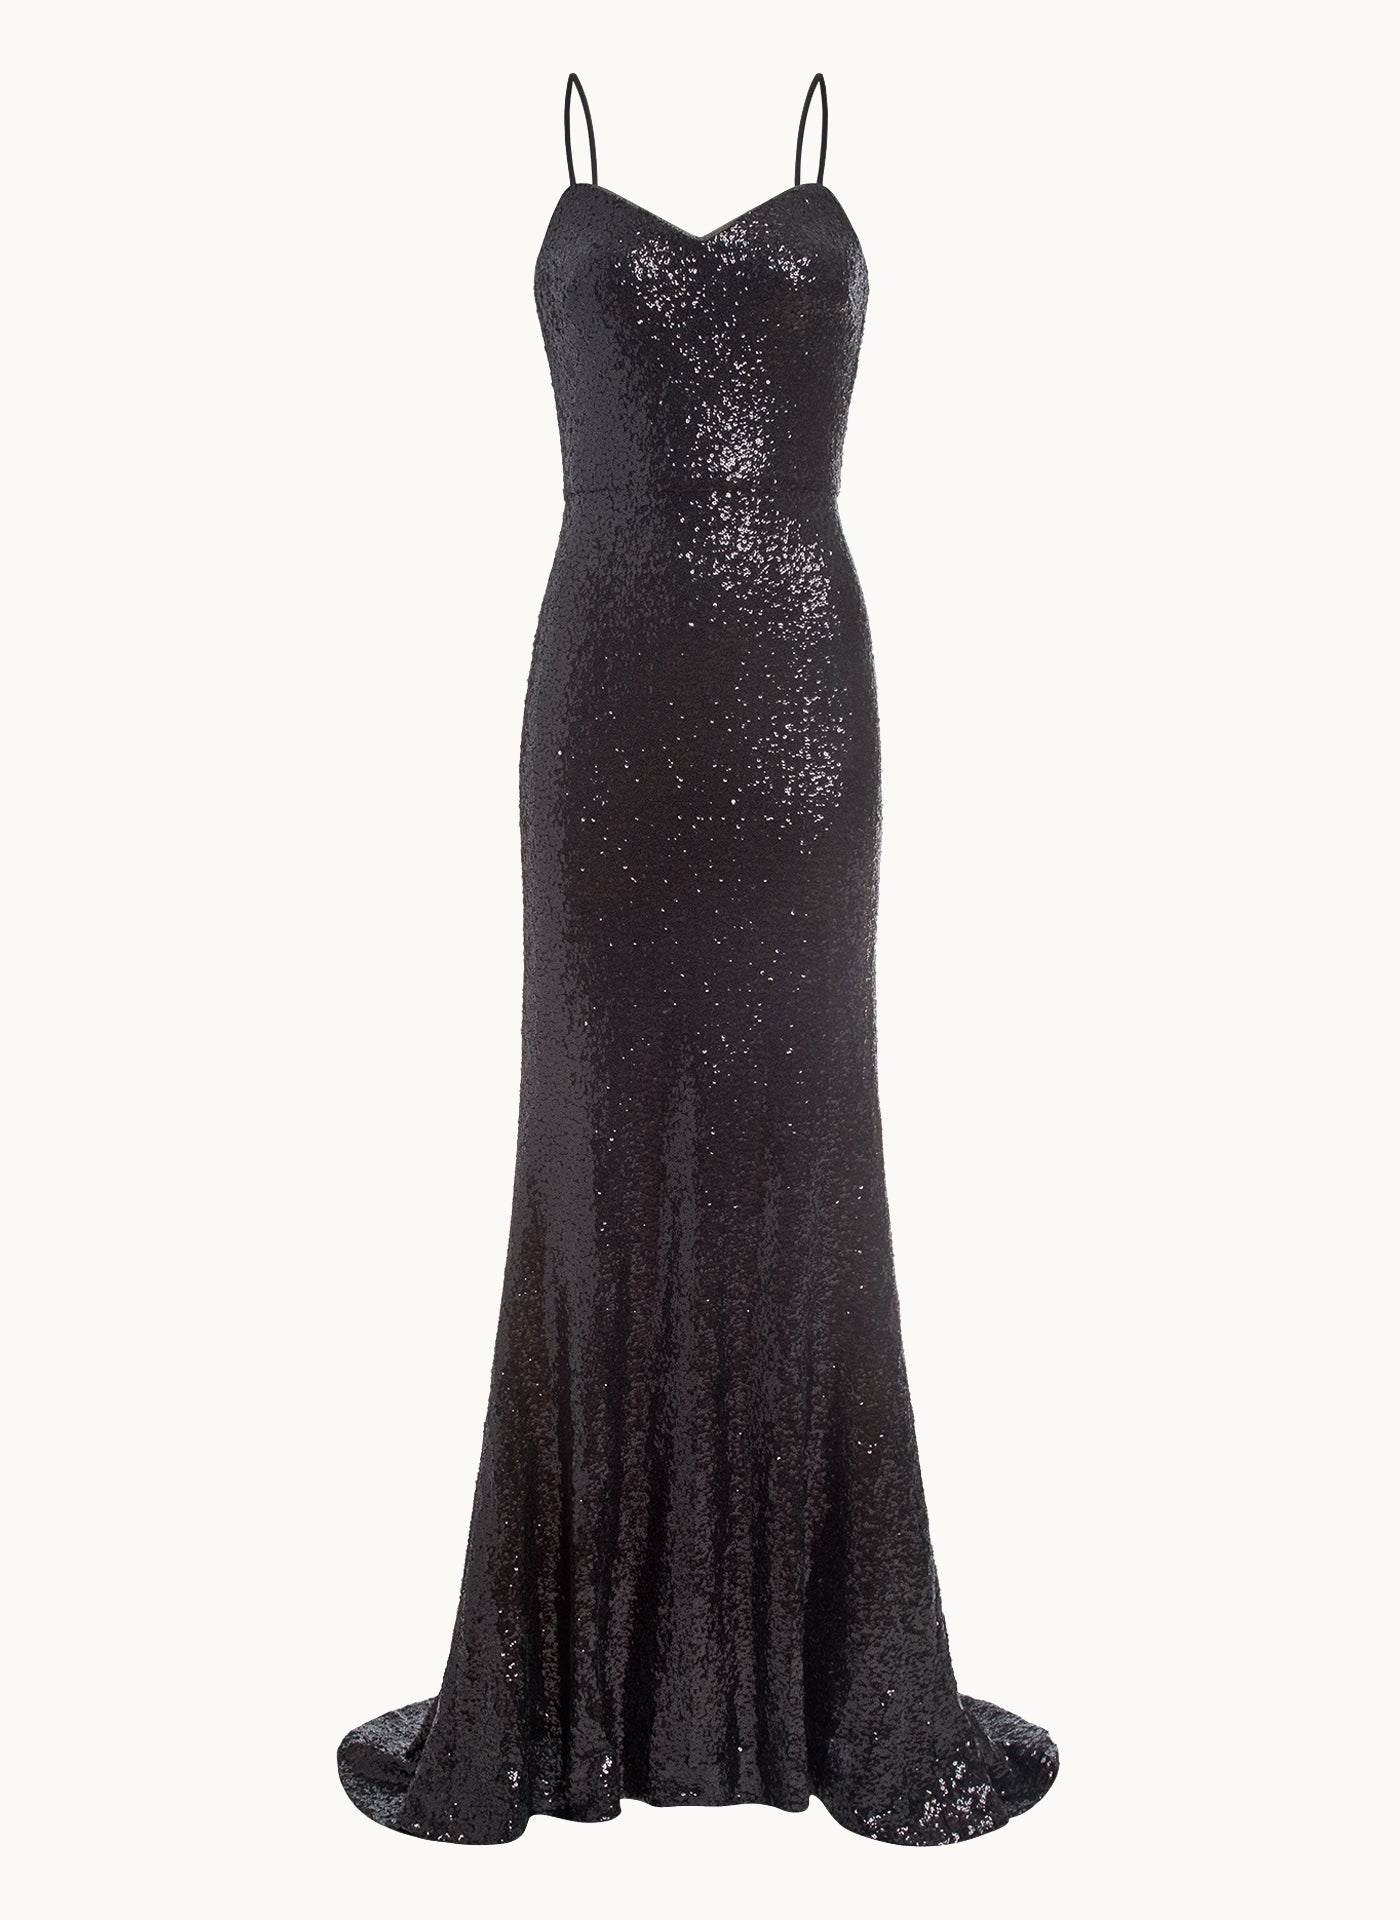 SEQUIN SLEEVELESS GOWN